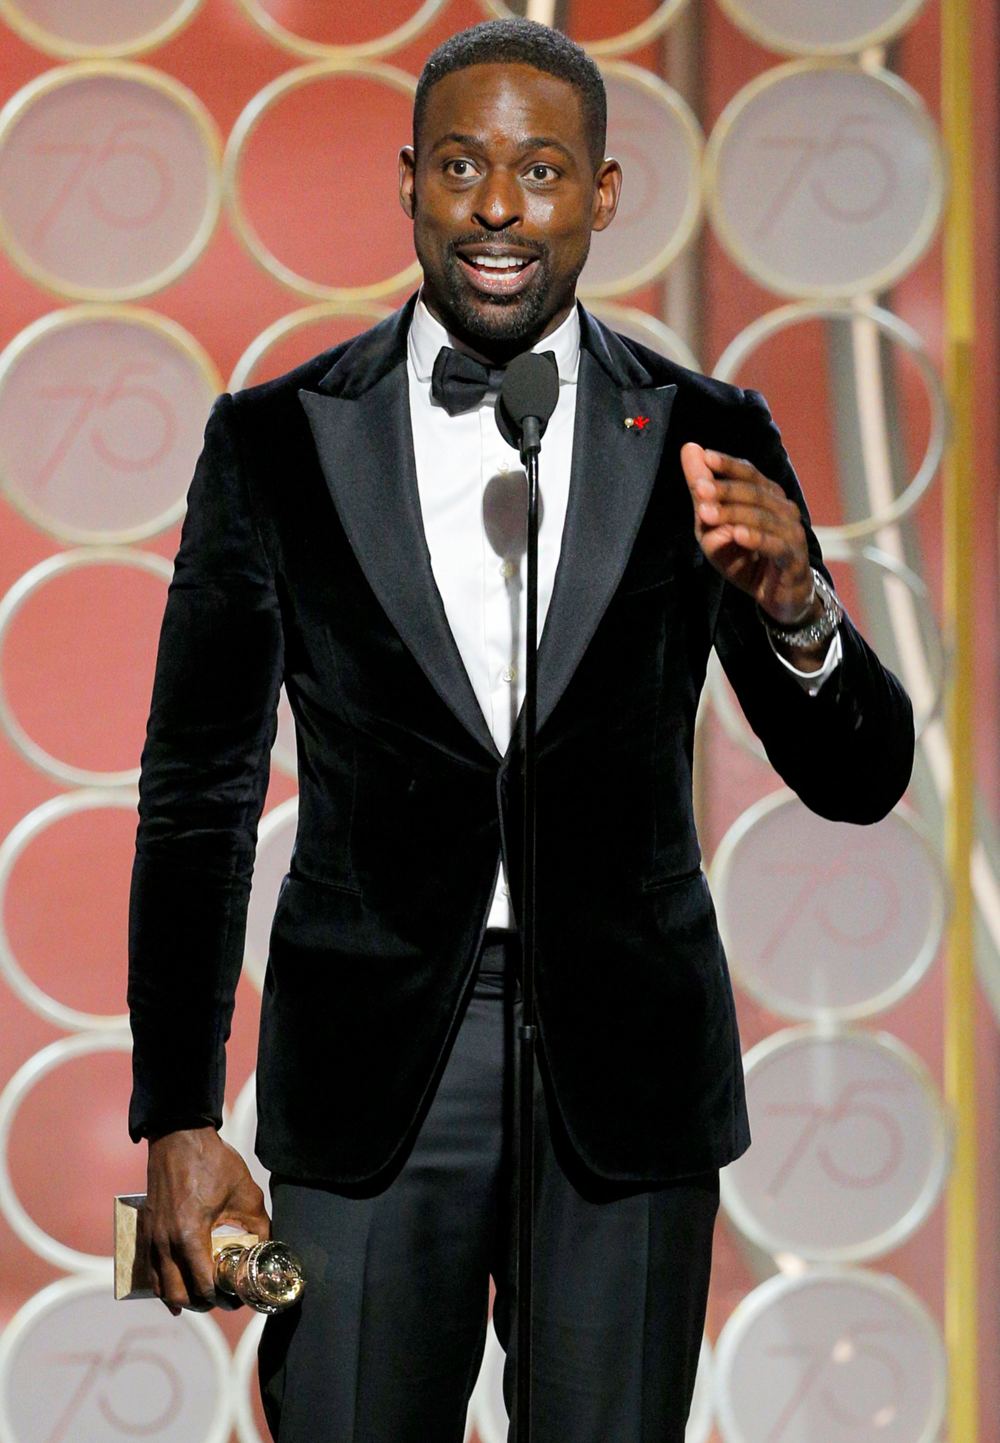 Sterling K. Brown accepts the award for Best Performance by an Actor in a Television Series – Drama for “This is Us” during the 75th Annual Golden Globe Awards at The Beverly Hilton Hotel on January 7, 2018 in Beverly Hills, California.